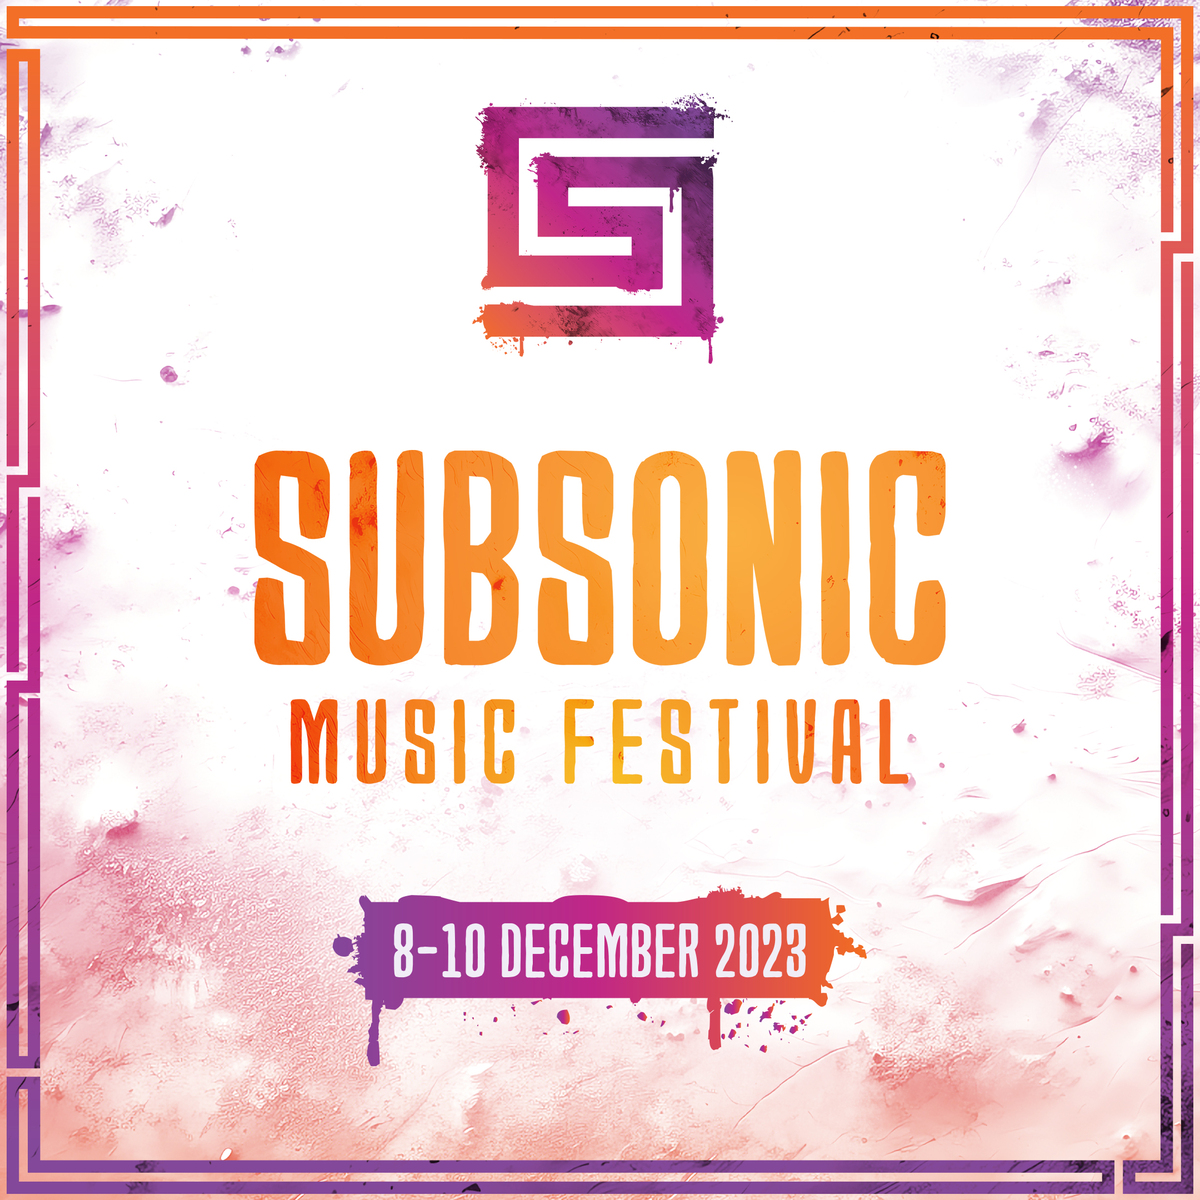 Subsonic Music Festival Tickets Monkerai Riverwood Downs The